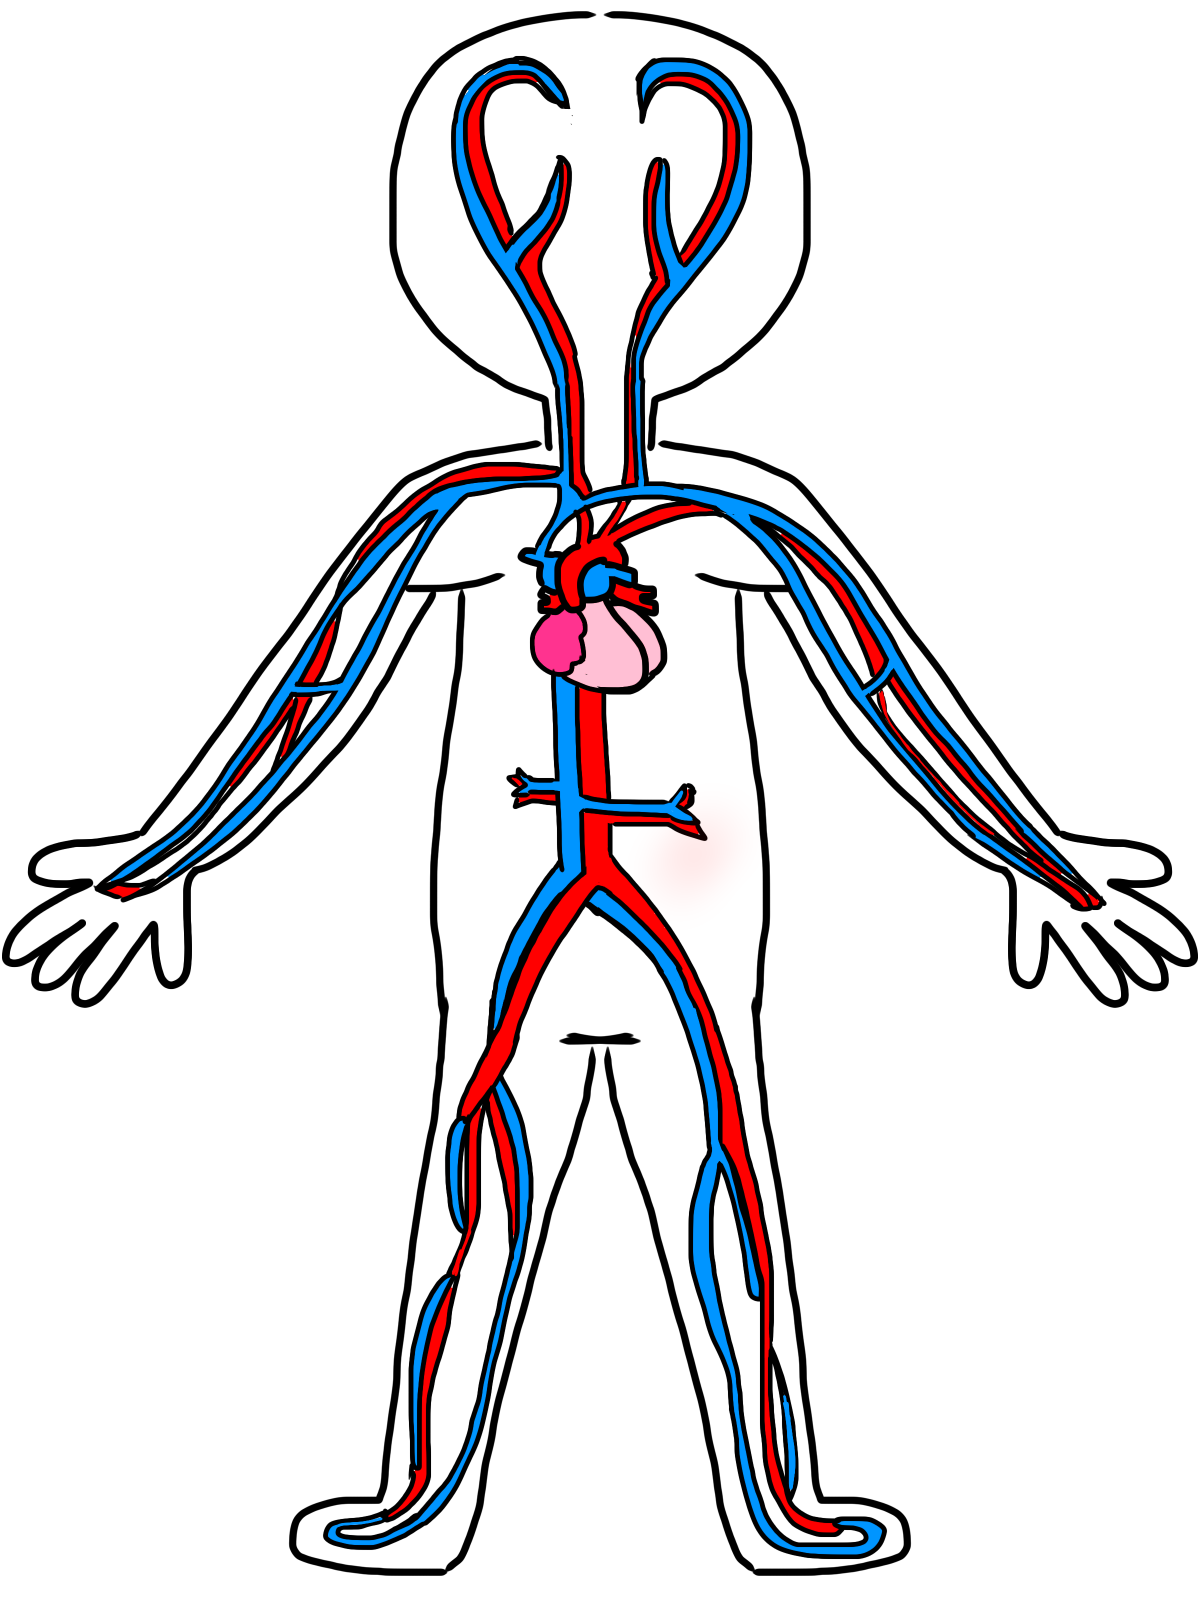 Circulatory System For Kids Coloring Pages - AZ Coloring Pages